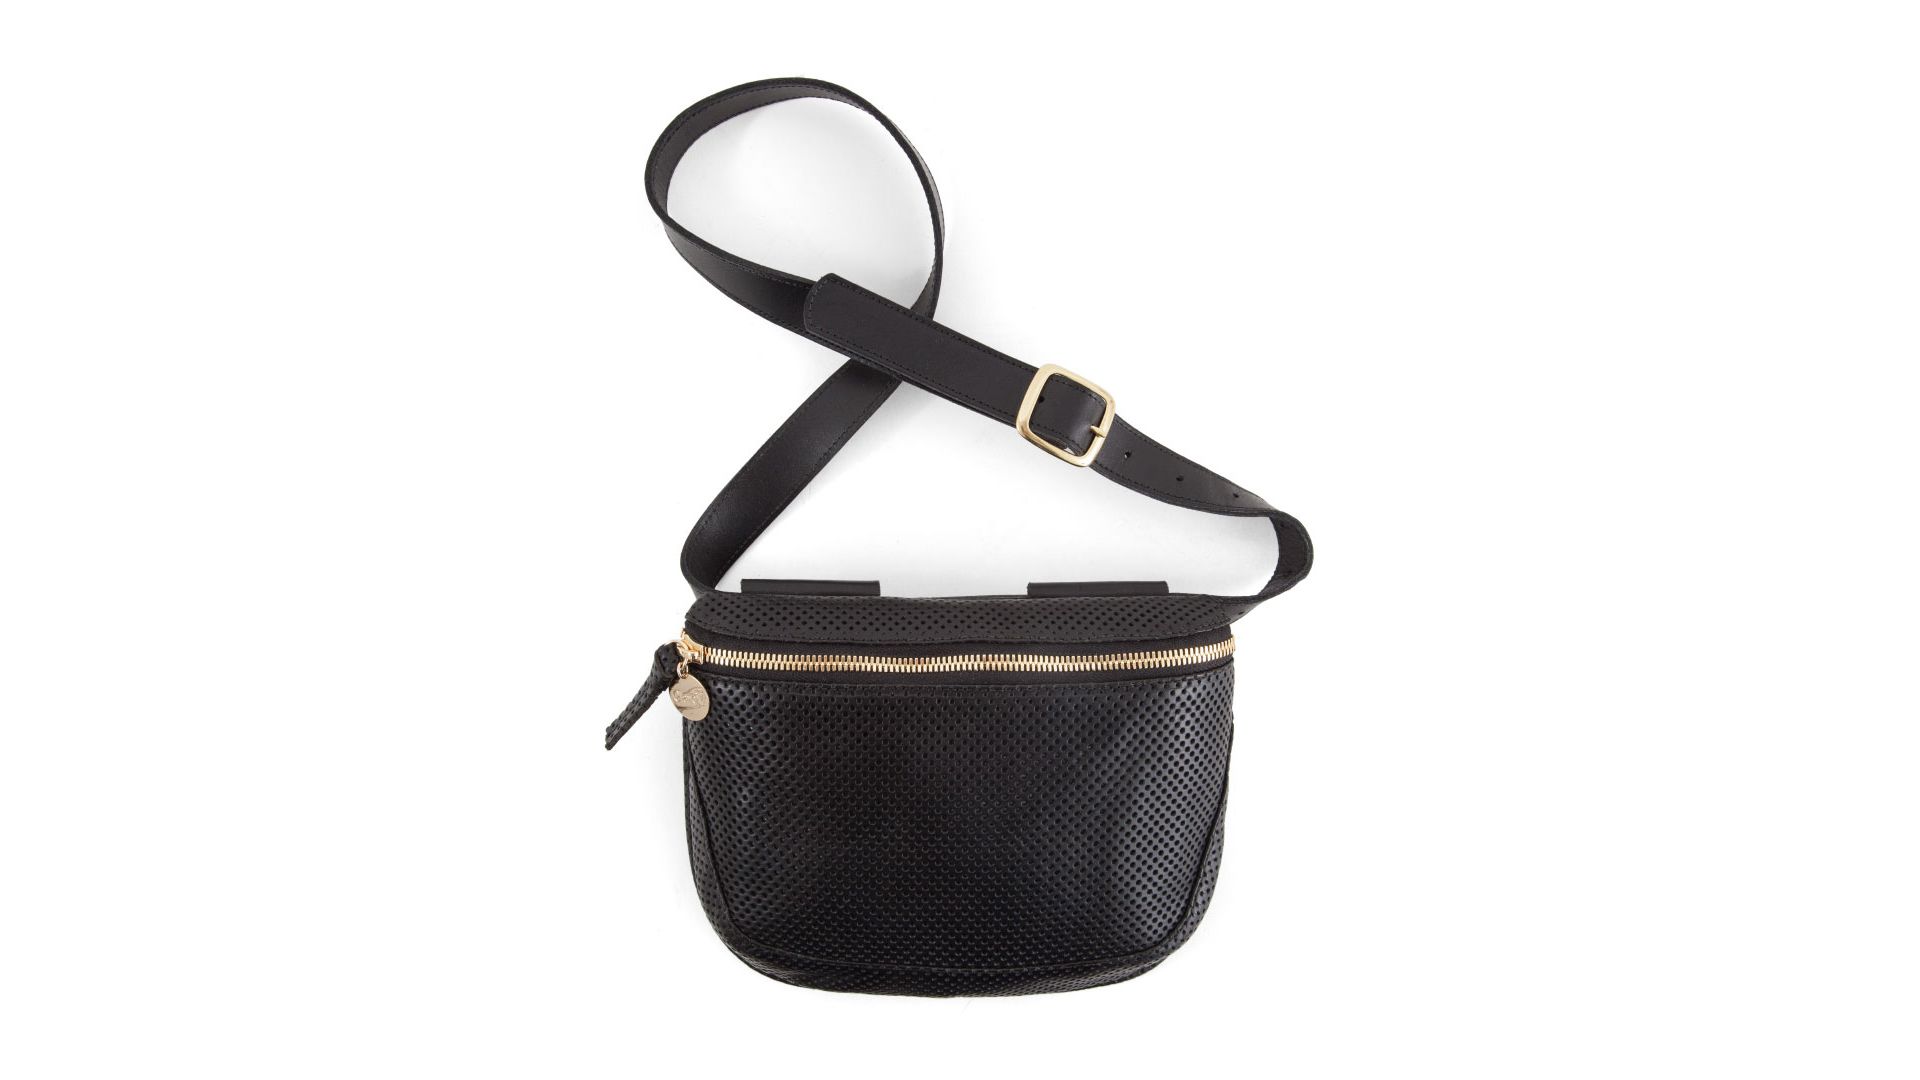 Travel belt bags: The stylish successor to the fanny pack